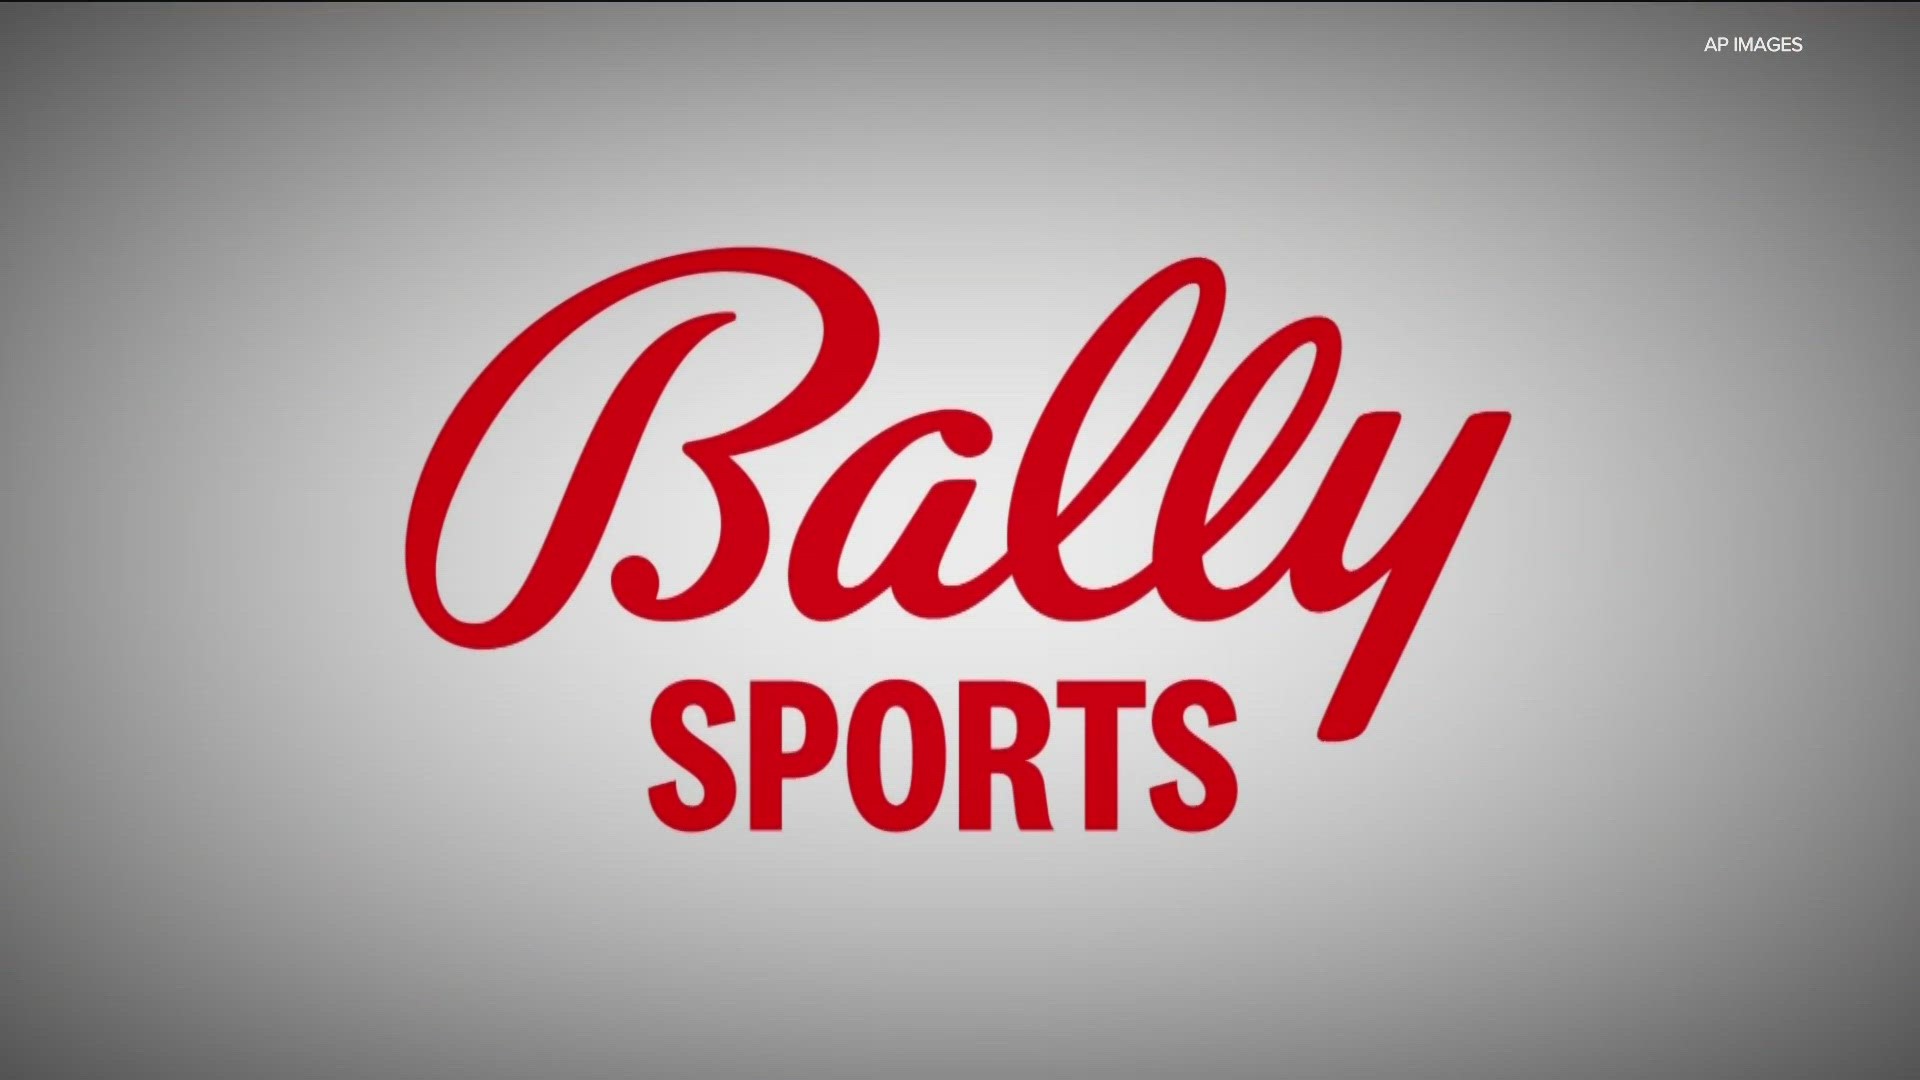 The deal will impact Minnesota viewers as Diamond owns Bally Sports North, which carries broadcasts of the Timberwolves and Wild.